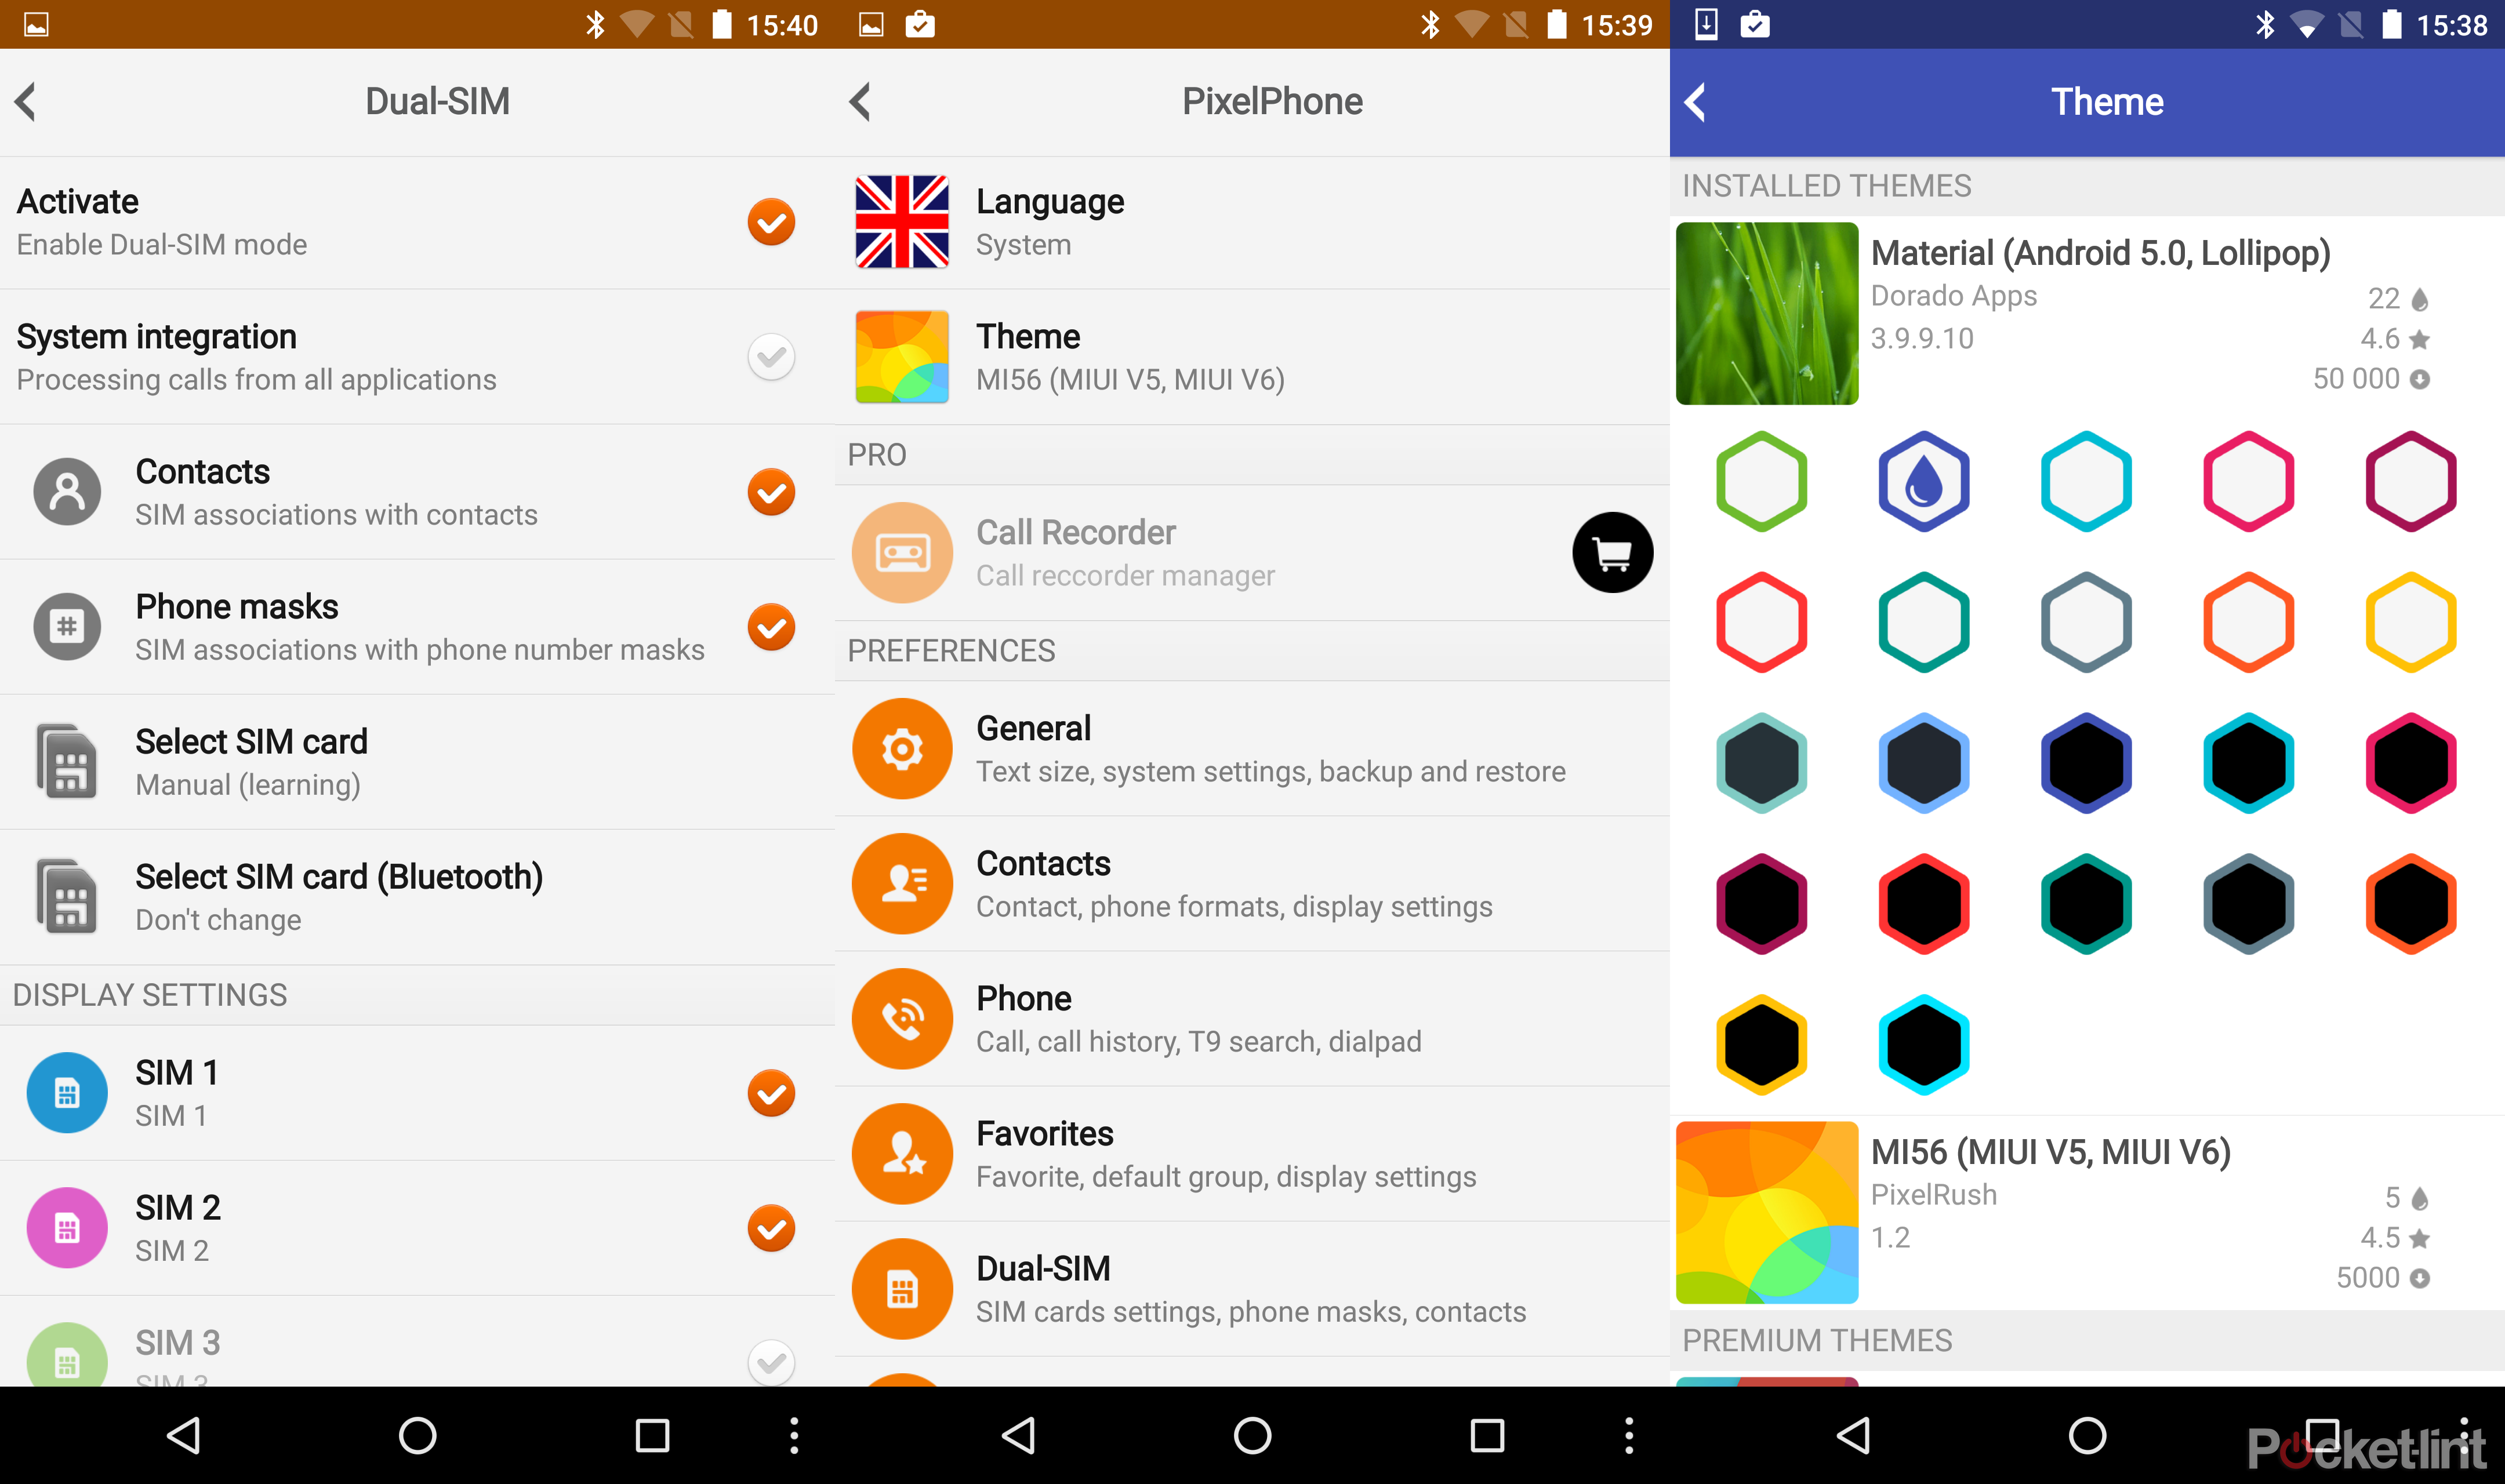 pixelphone app for android makes light work of phoning people image 2